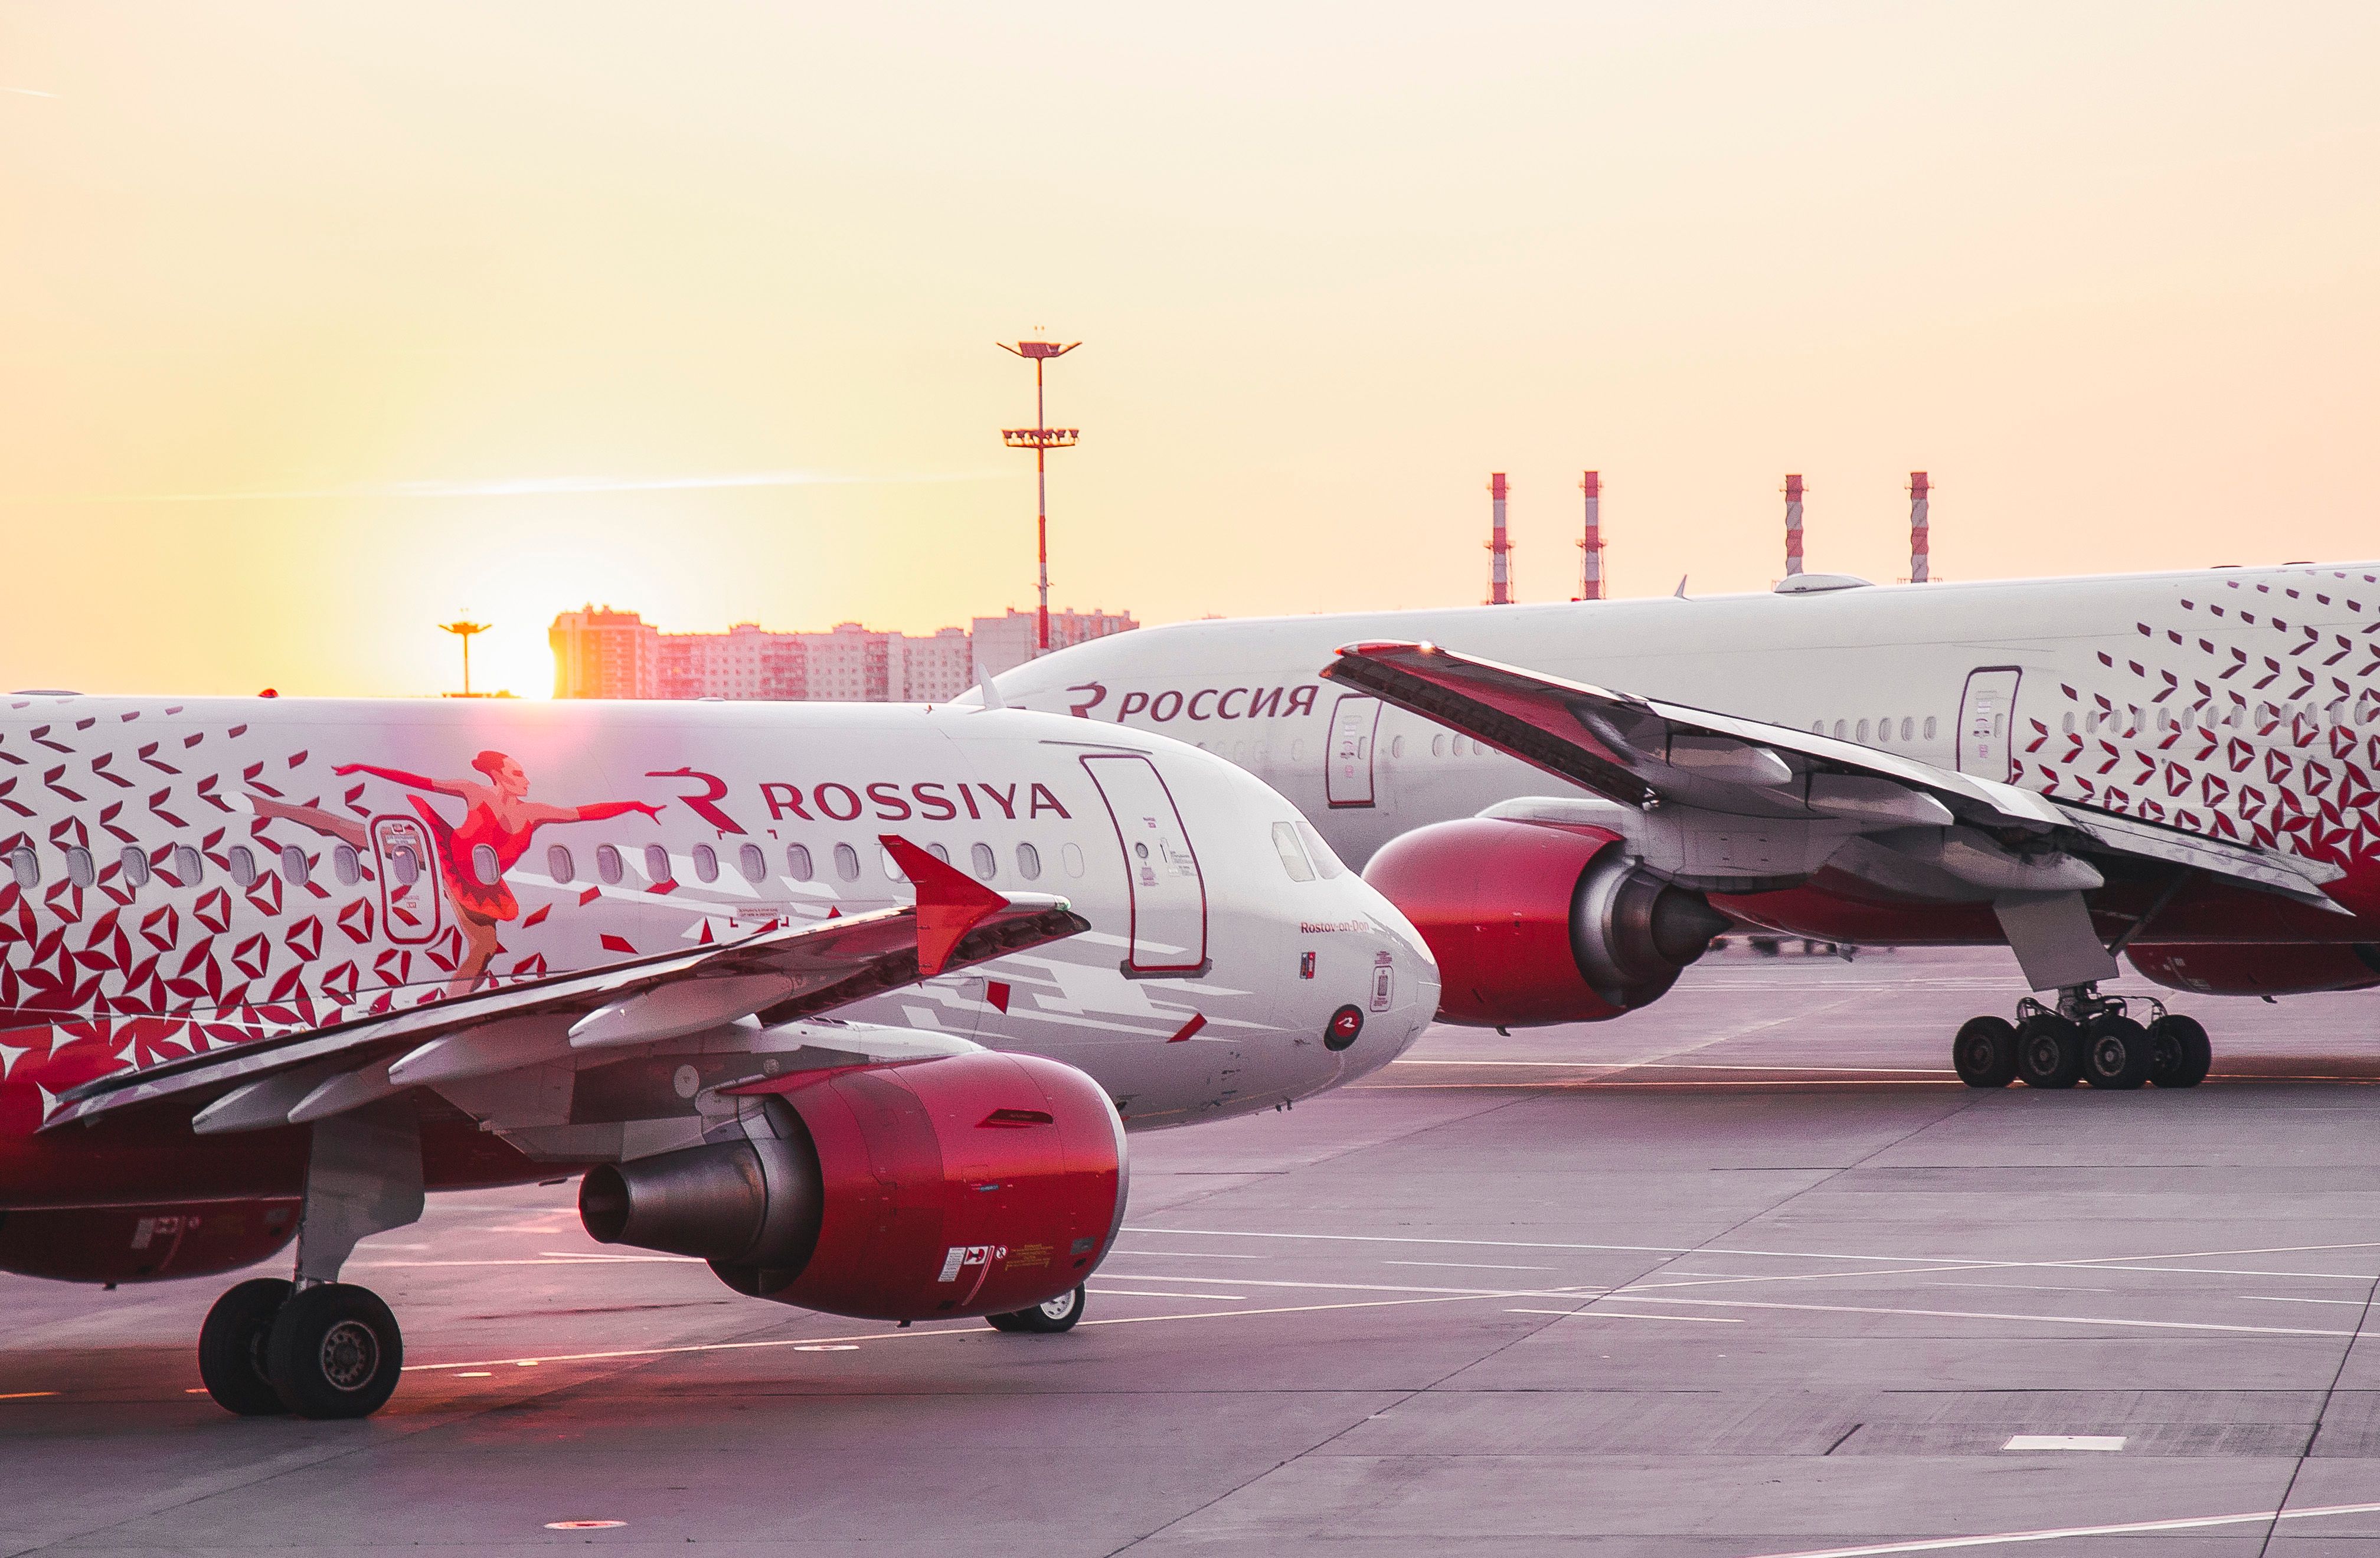 Rossiya Airlines aircraft on ground a sunset